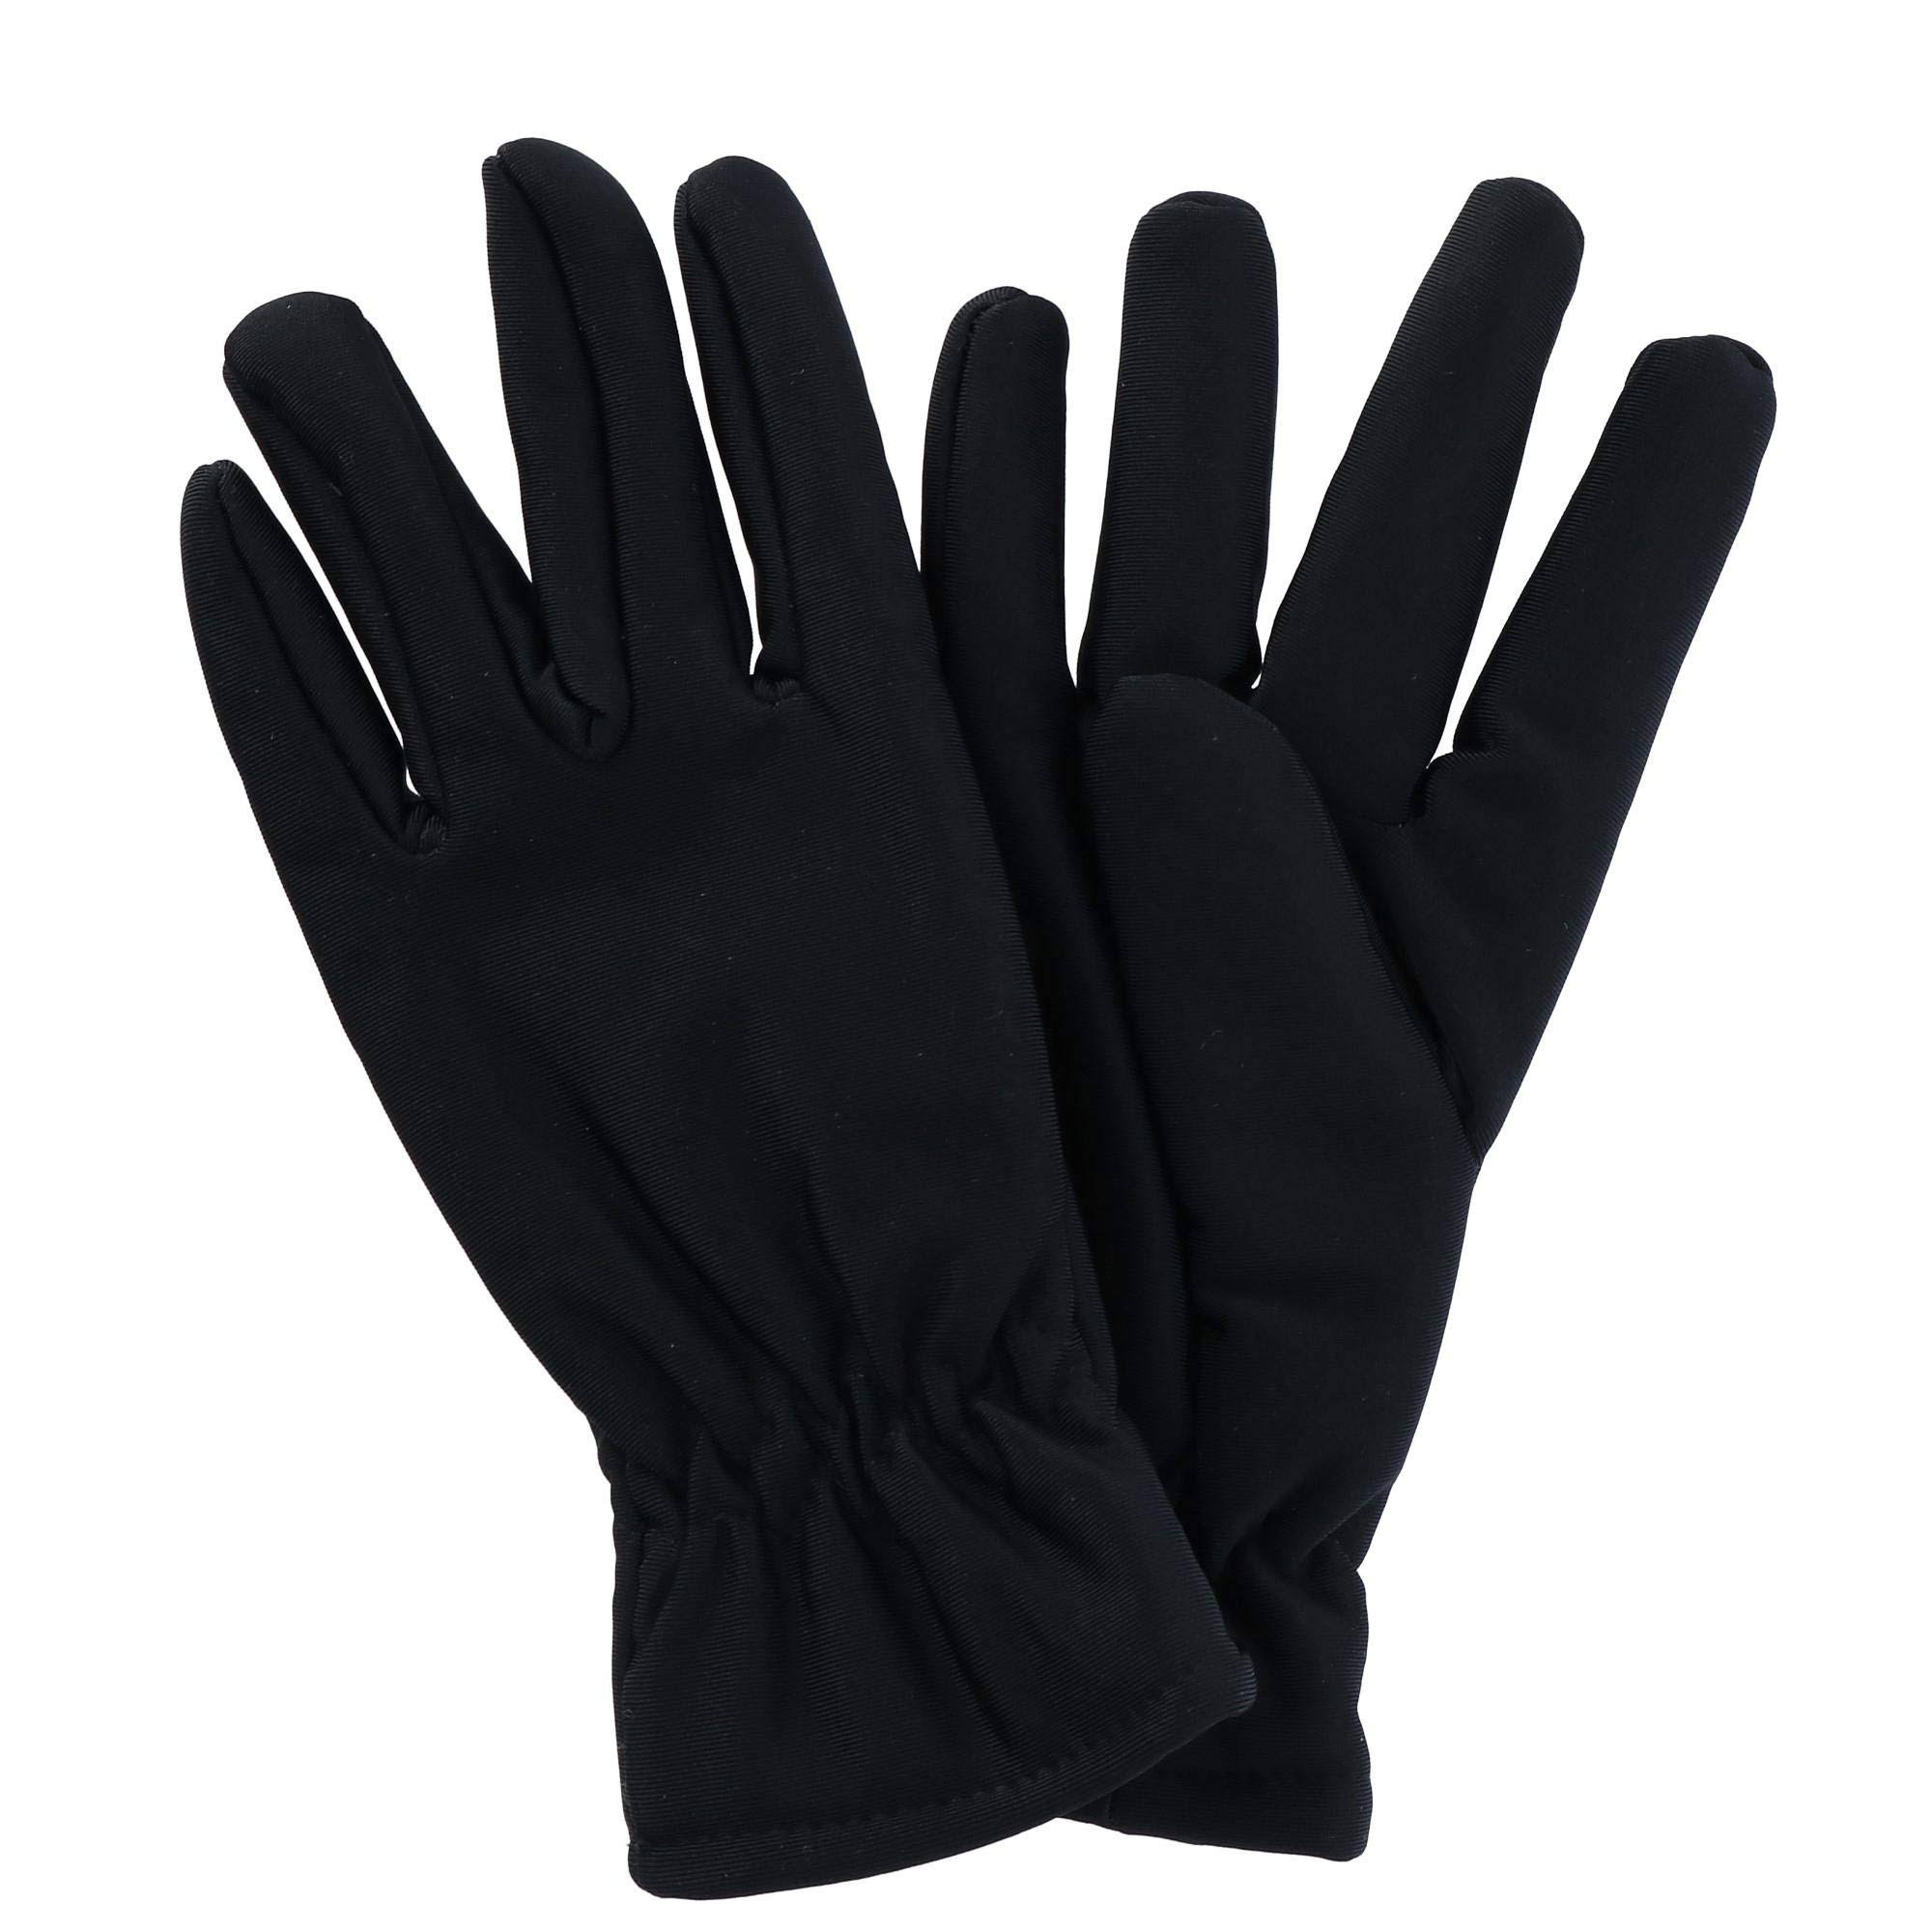 Polar Extreme Men's Insulated Thermal Gloves Black Size L/XL